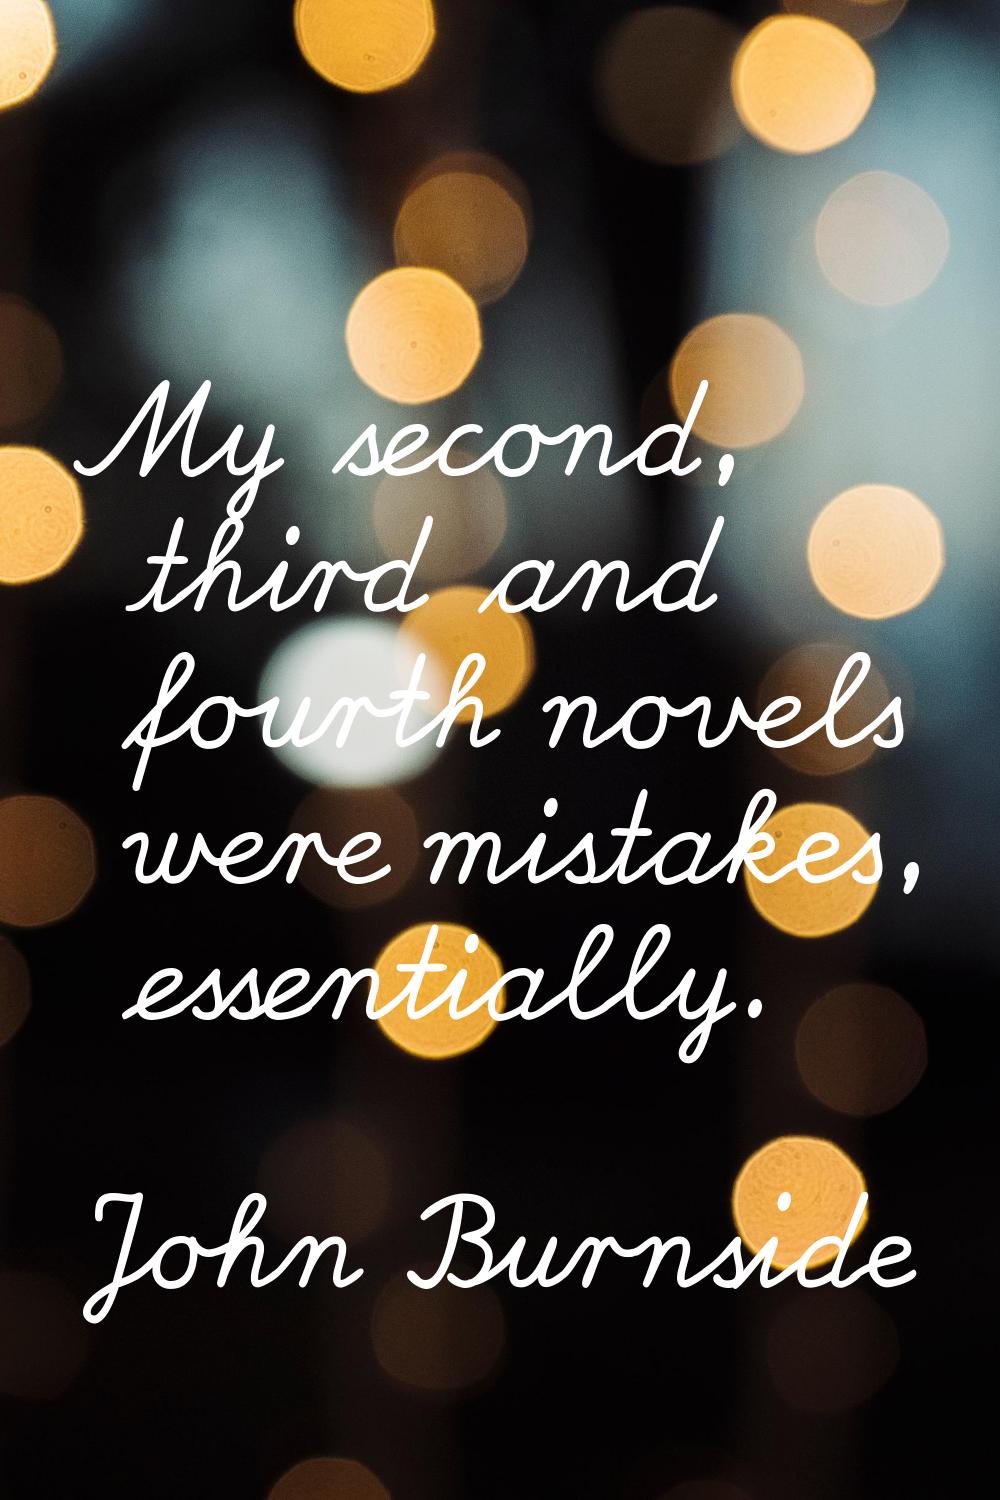 My second, third and fourth novels were mistakes, essentially.